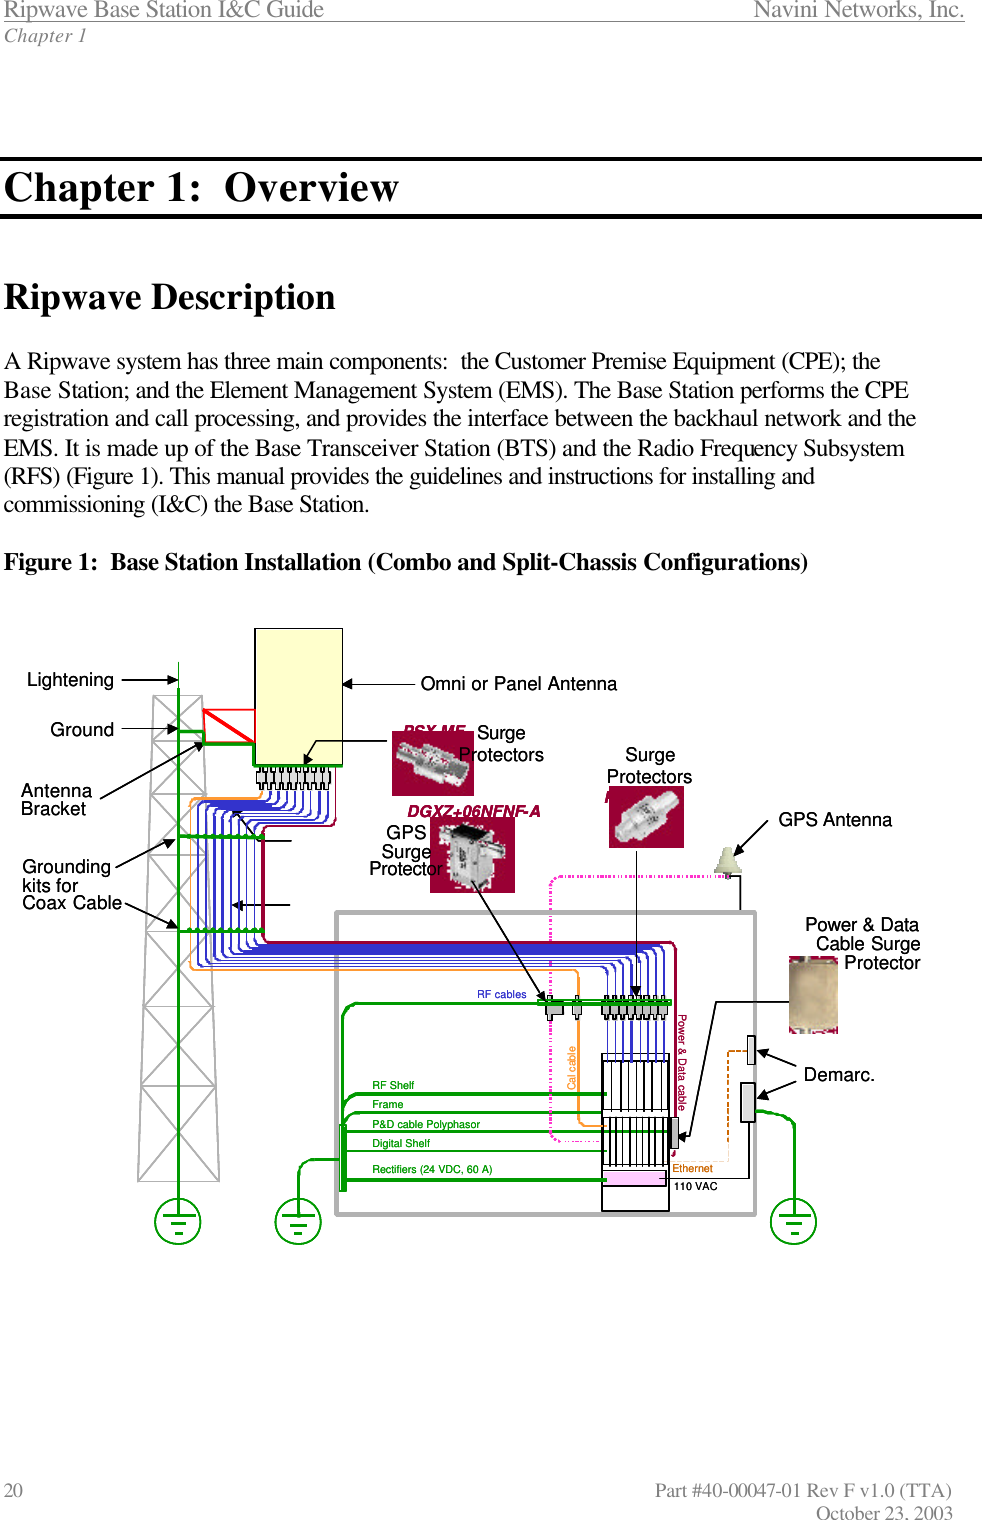 Ripwave Base Station I&amp;C Guide                 Navini Networks, Inc. Chapter 1 20                   Part #40-00047-01 Rev F v1.0 (TTA)                                       October 23, 2003    Chapter 1:  Overview   Ripwave Description  A Ripwave system has three main components:  the Customer Premise Equipment (CPE); the Base Station; and the Element Management System (EMS). The Base Station performs the CPE registration and call processing, and provides the interface between the backhaul network and the EMS. It is made up of the Base Transceiver Station (BTS) and the Radio Frequency Subsystem (RFS) (Figure 1). This manual provides the guidelines and instructions for installing and commissioning (I&amp;C) the Base Station.  Figure 1:  Base Station Installation (Combo and Split-Chassis Configurations)      Grounding kits for Coax CableAntennaBracketOmni or Panel AntennaLighteningGroundGPS AntennaRF ShelfDigital ShelfRectifiers (24 VDC, 60 A)Cal cableP&amp;D cable PolyphasorPower &amp; Data cableRF cablesFrameEthernet110 VACDemarc.PSXPSX-MEDGXZ+06NFNF-APower &amp; DataCable Surge ProtectorGPSSurge ProtectorSurgeProtectors SurgeProtectorsGrounding kits for Coax CableAntennaBracketOmni or Panel AntennaLighteningGroundGPS AntennaRF ShelfDigital ShelfRectifiers (24 VDC, 60 A)Cal cableP&amp;D cable PolyphasorPower &amp; Data cableRF cablesFrameEthernet110 VACDemarc.PSXPSXPSX-MEPSX-MEDGXZ+06NFNF-ADGXZ+06NFNF-APower &amp; DataCable Surge ProtectorGPSSurge ProtectorSurgeProtectors SurgeProtectors